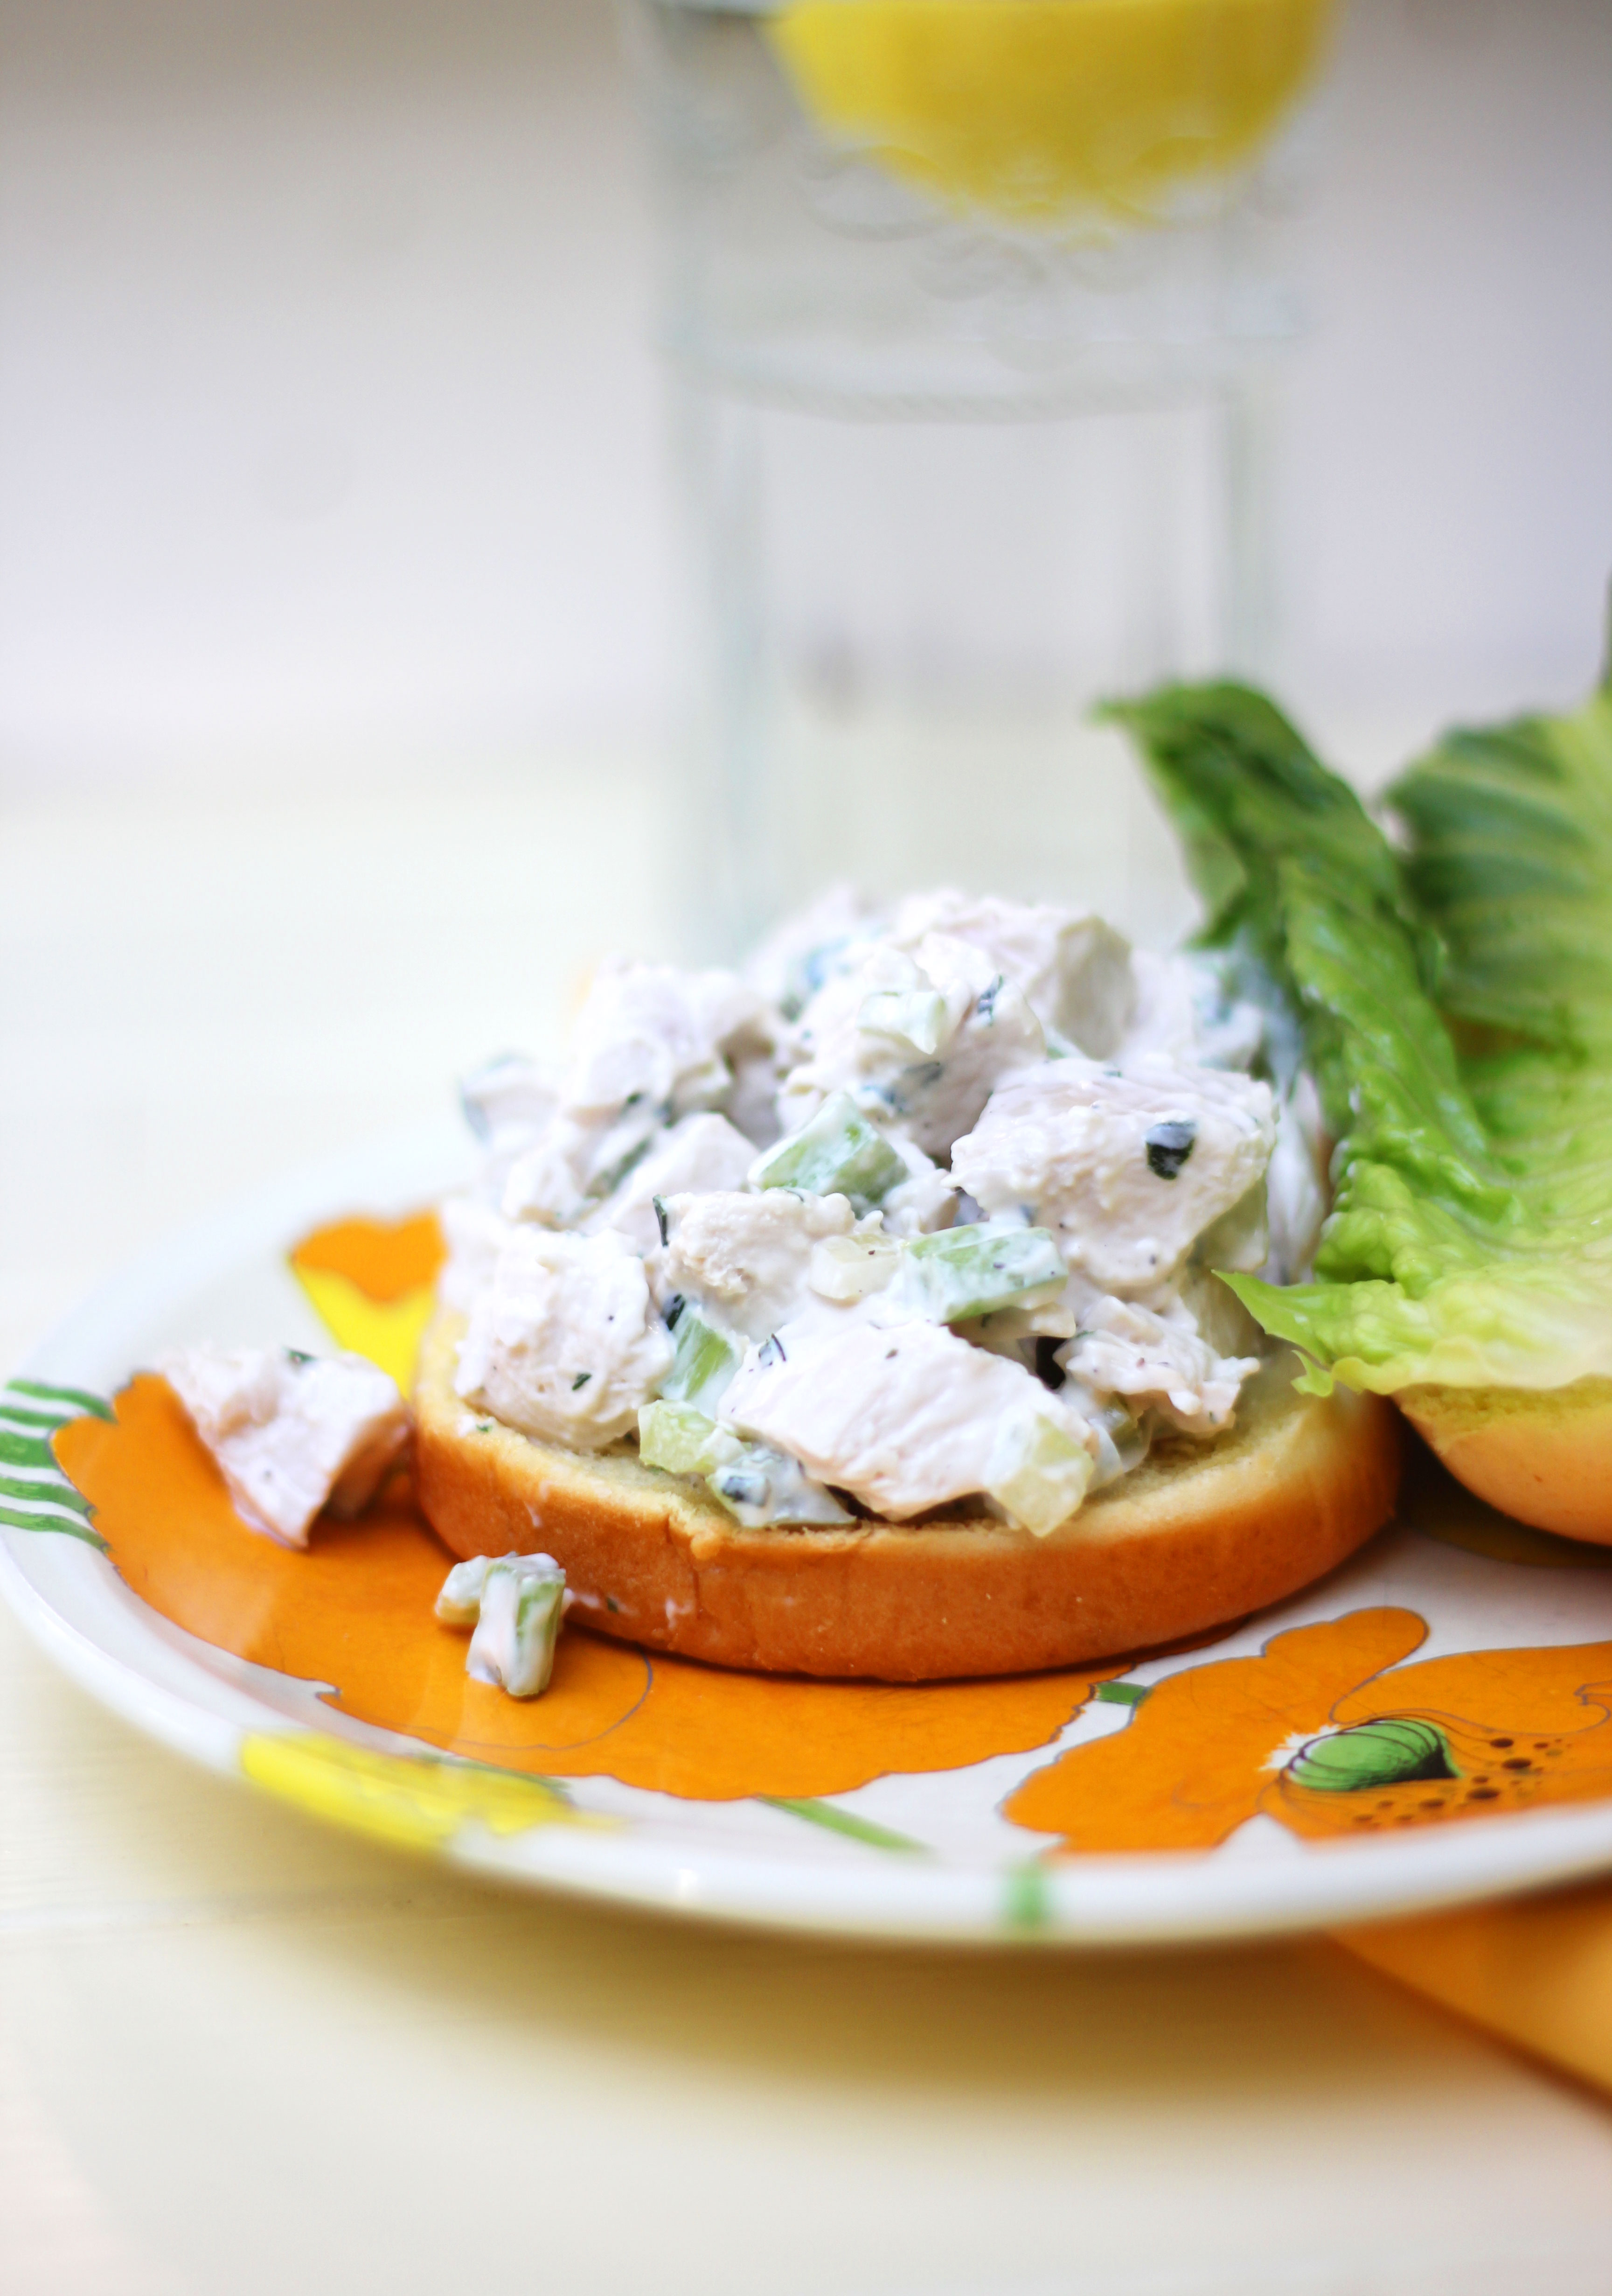 Upgrade your lunch with this super easy homemade chicken salad recipe that packs major taste! Put it on your favorite bread with crispy lettuce and enjoy!